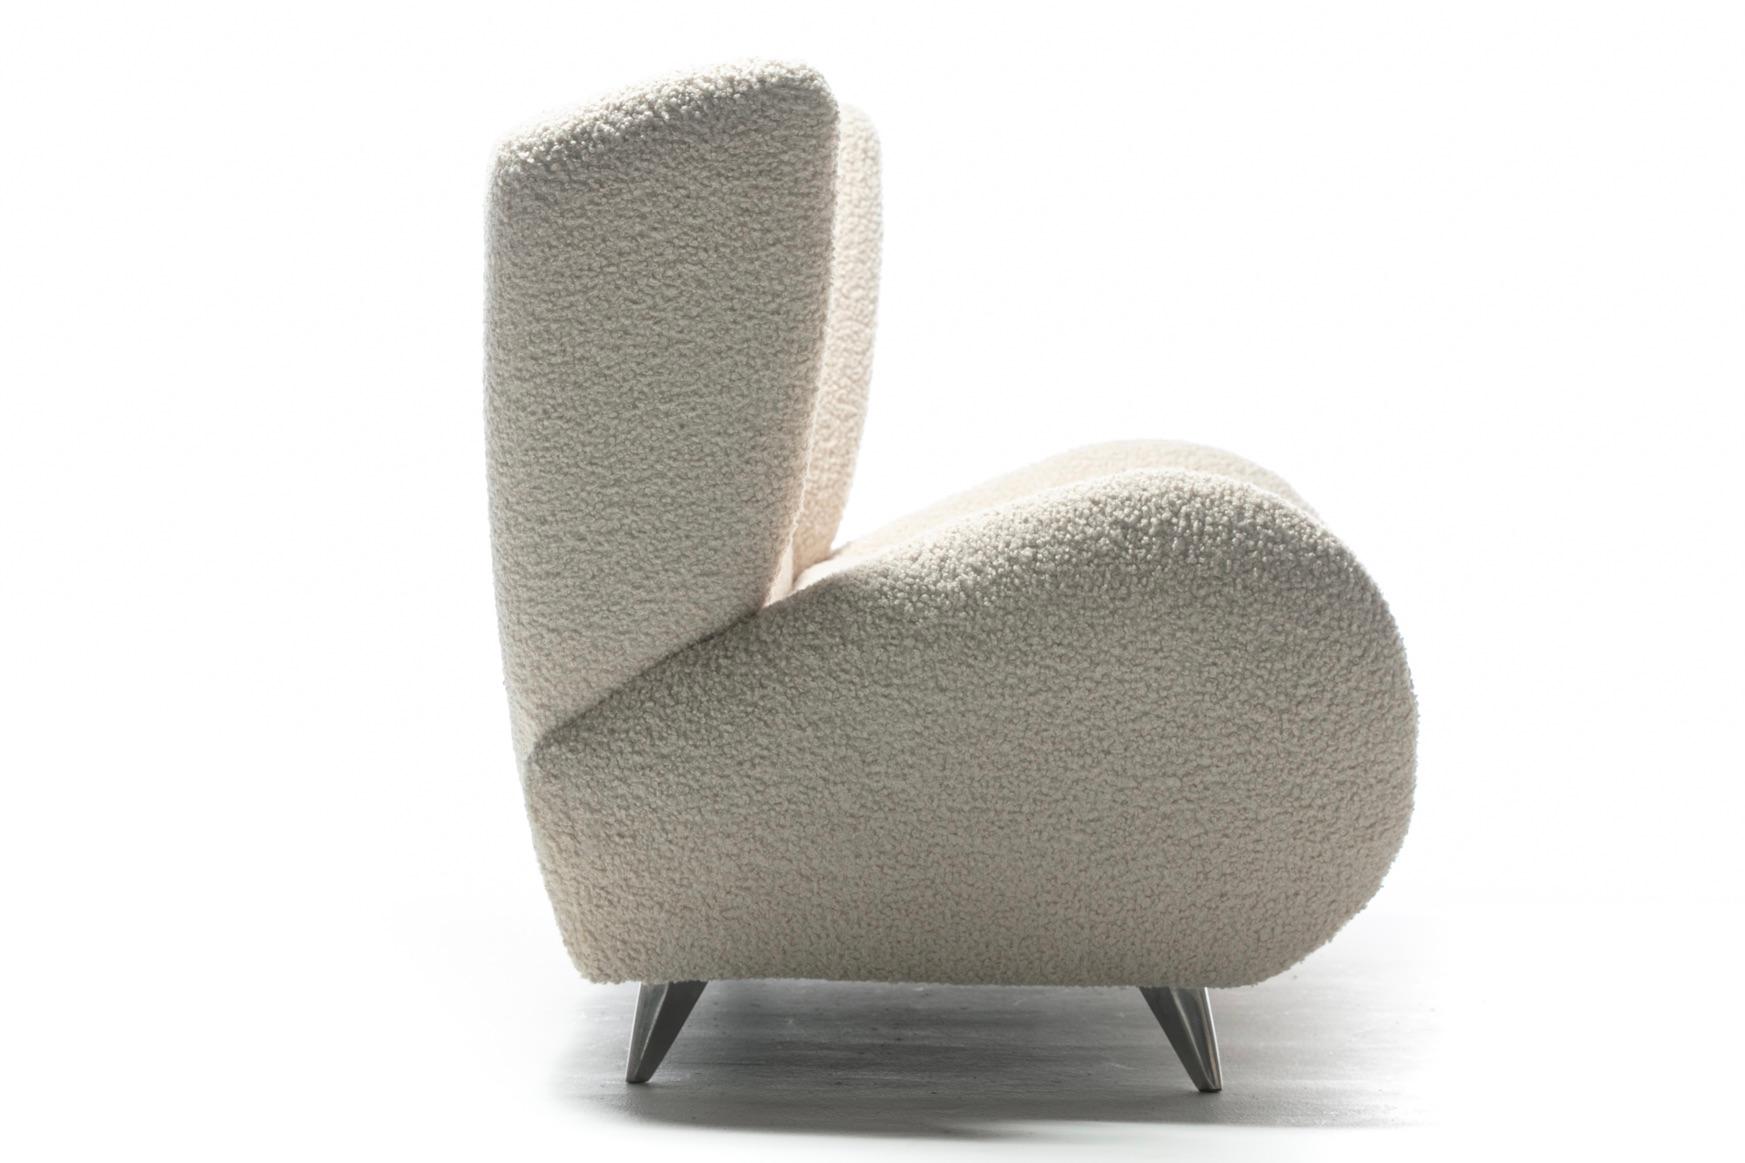 A love for his 1950s wingback design motivated Vladimir Kagan to circle back and produce a more contemporary version he later named the Fiftyish Sofa. Vladimir Kagan's tendency to over emphasize curves is evident in this sofa's design. True to that